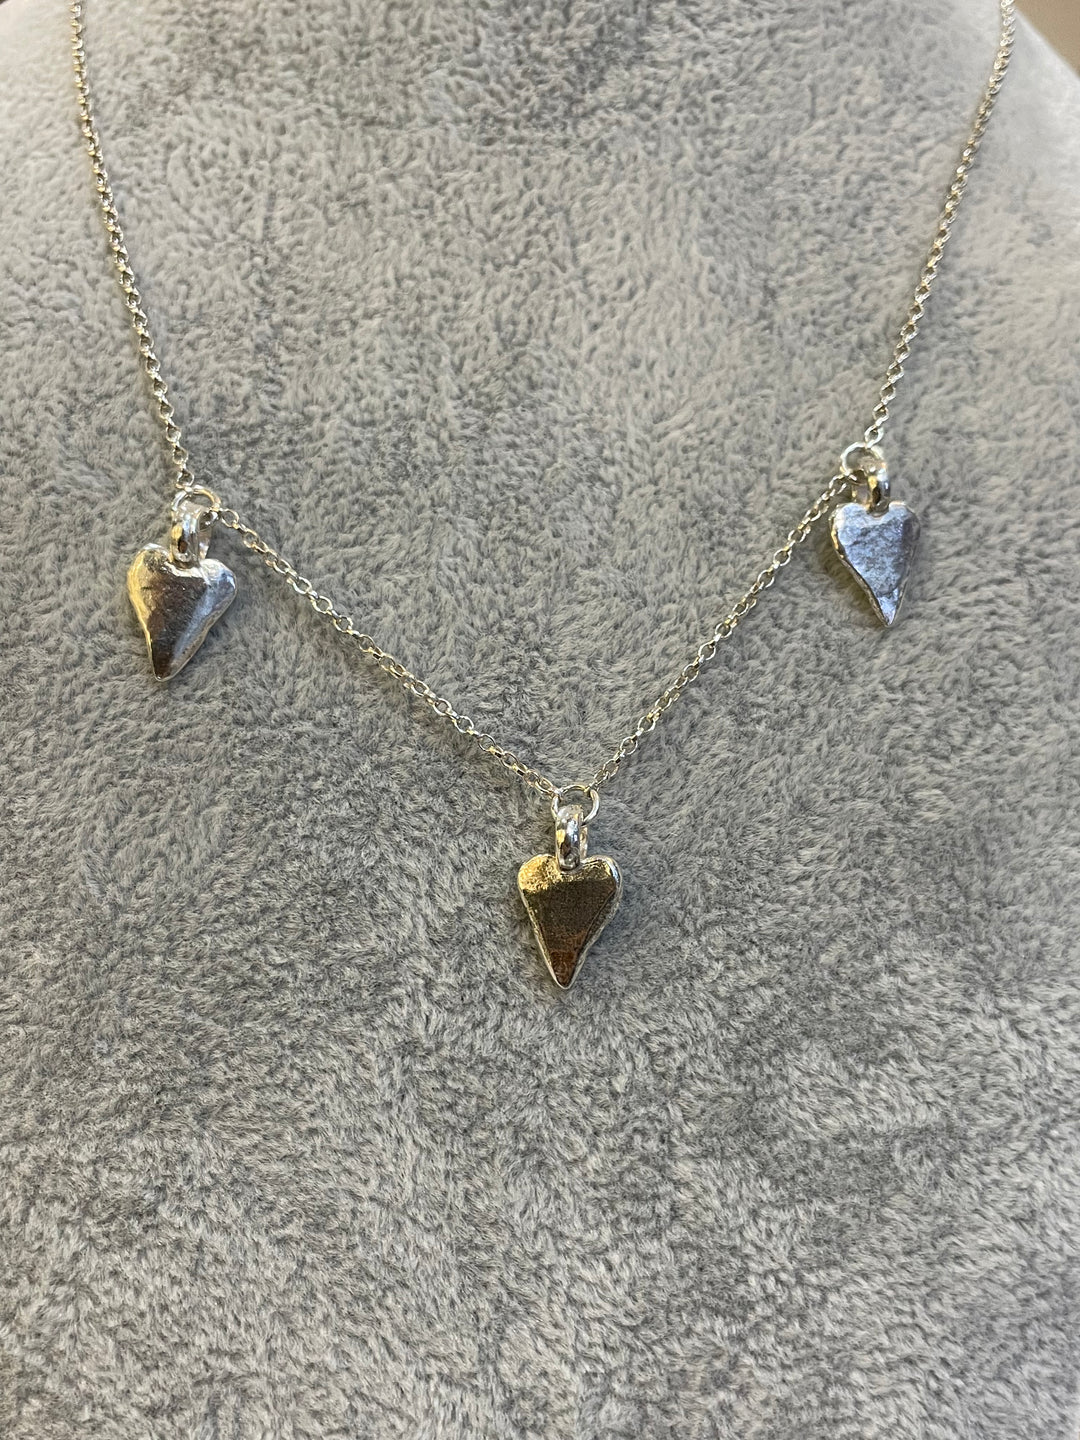 3 heart Charm Necklace